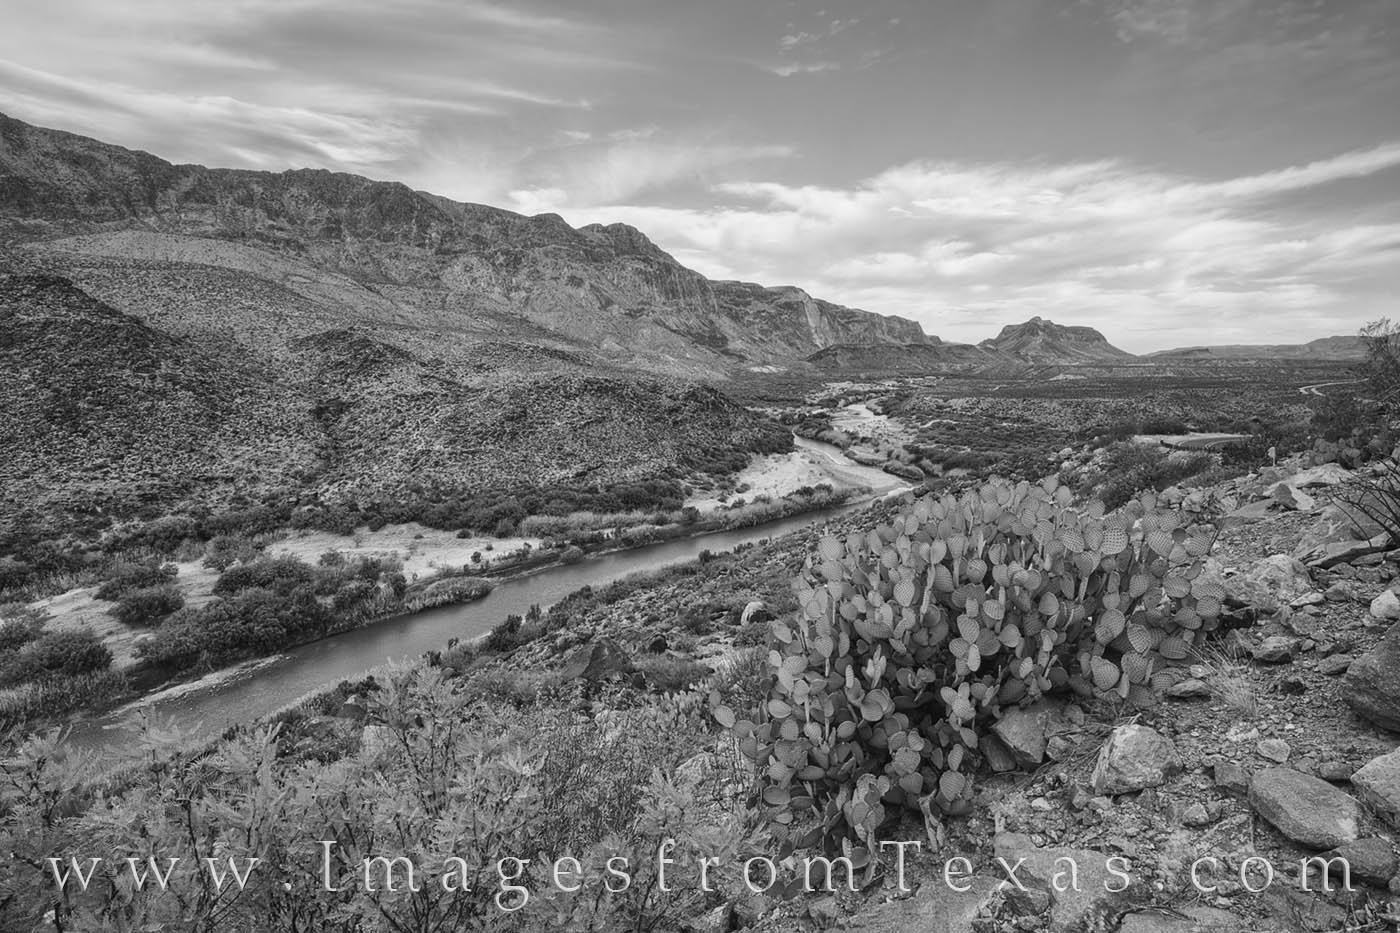 This black and white photograph from west Texas and the Big Bend area shows the rugged landscape as the river winds its way east...